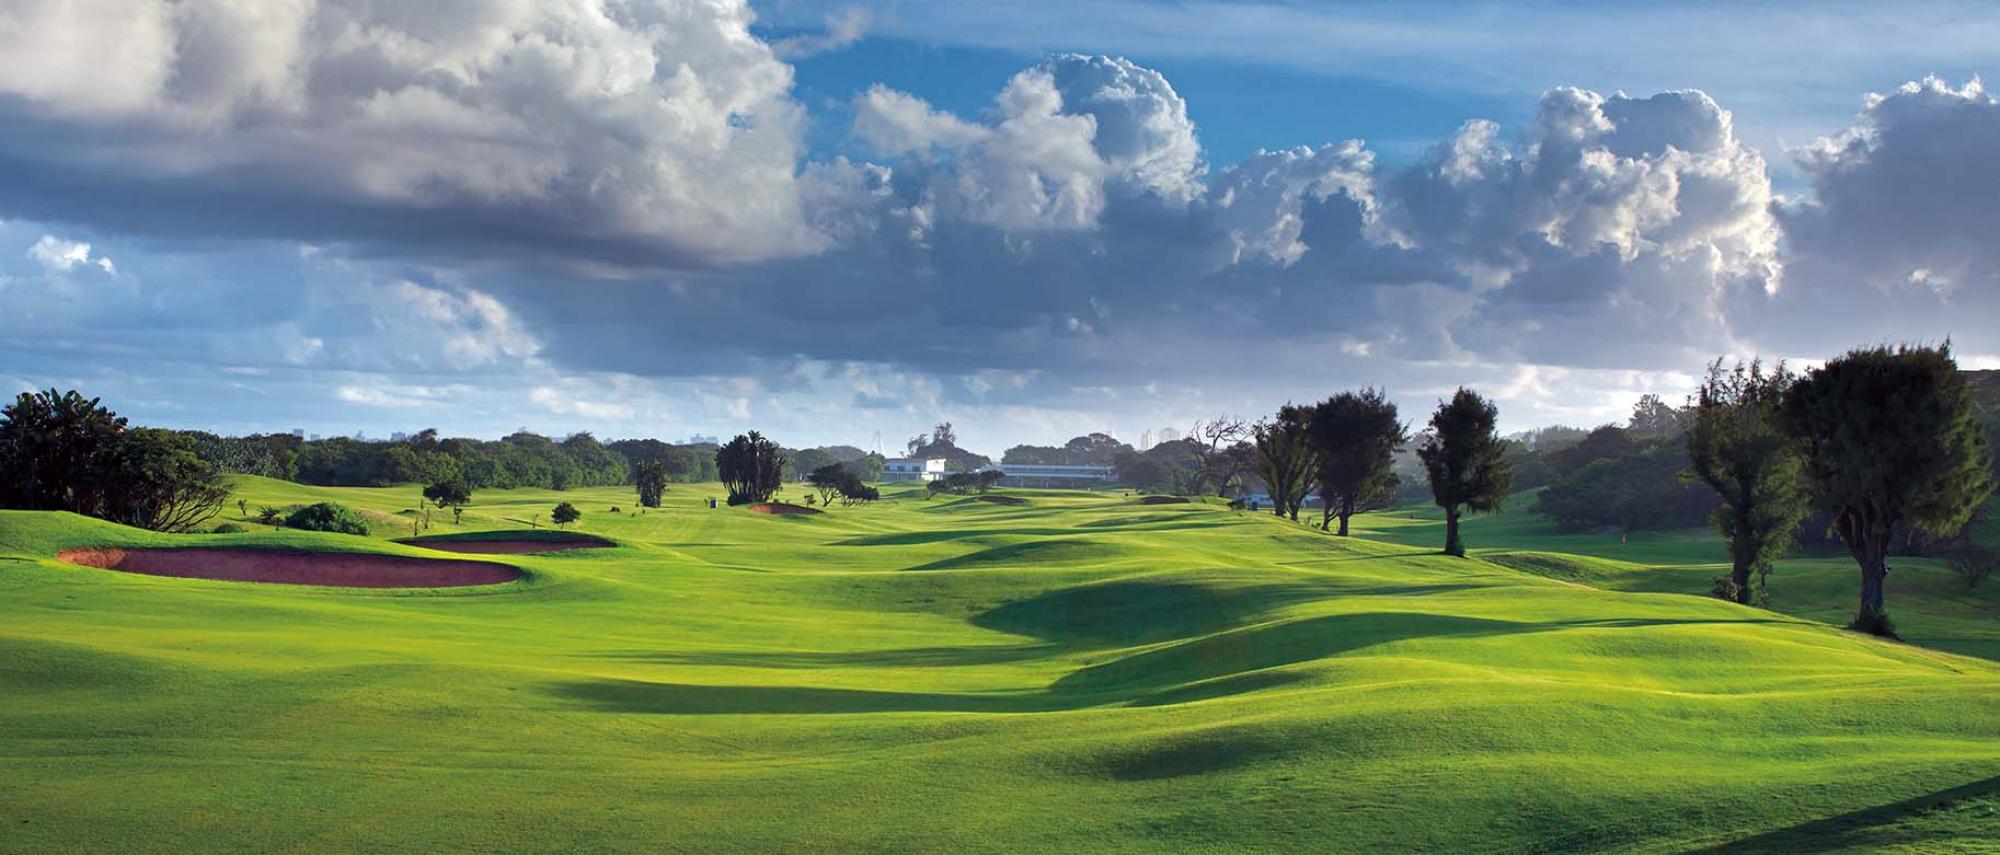 View Durban Country Club's scenic golf course in sensational South Africa.